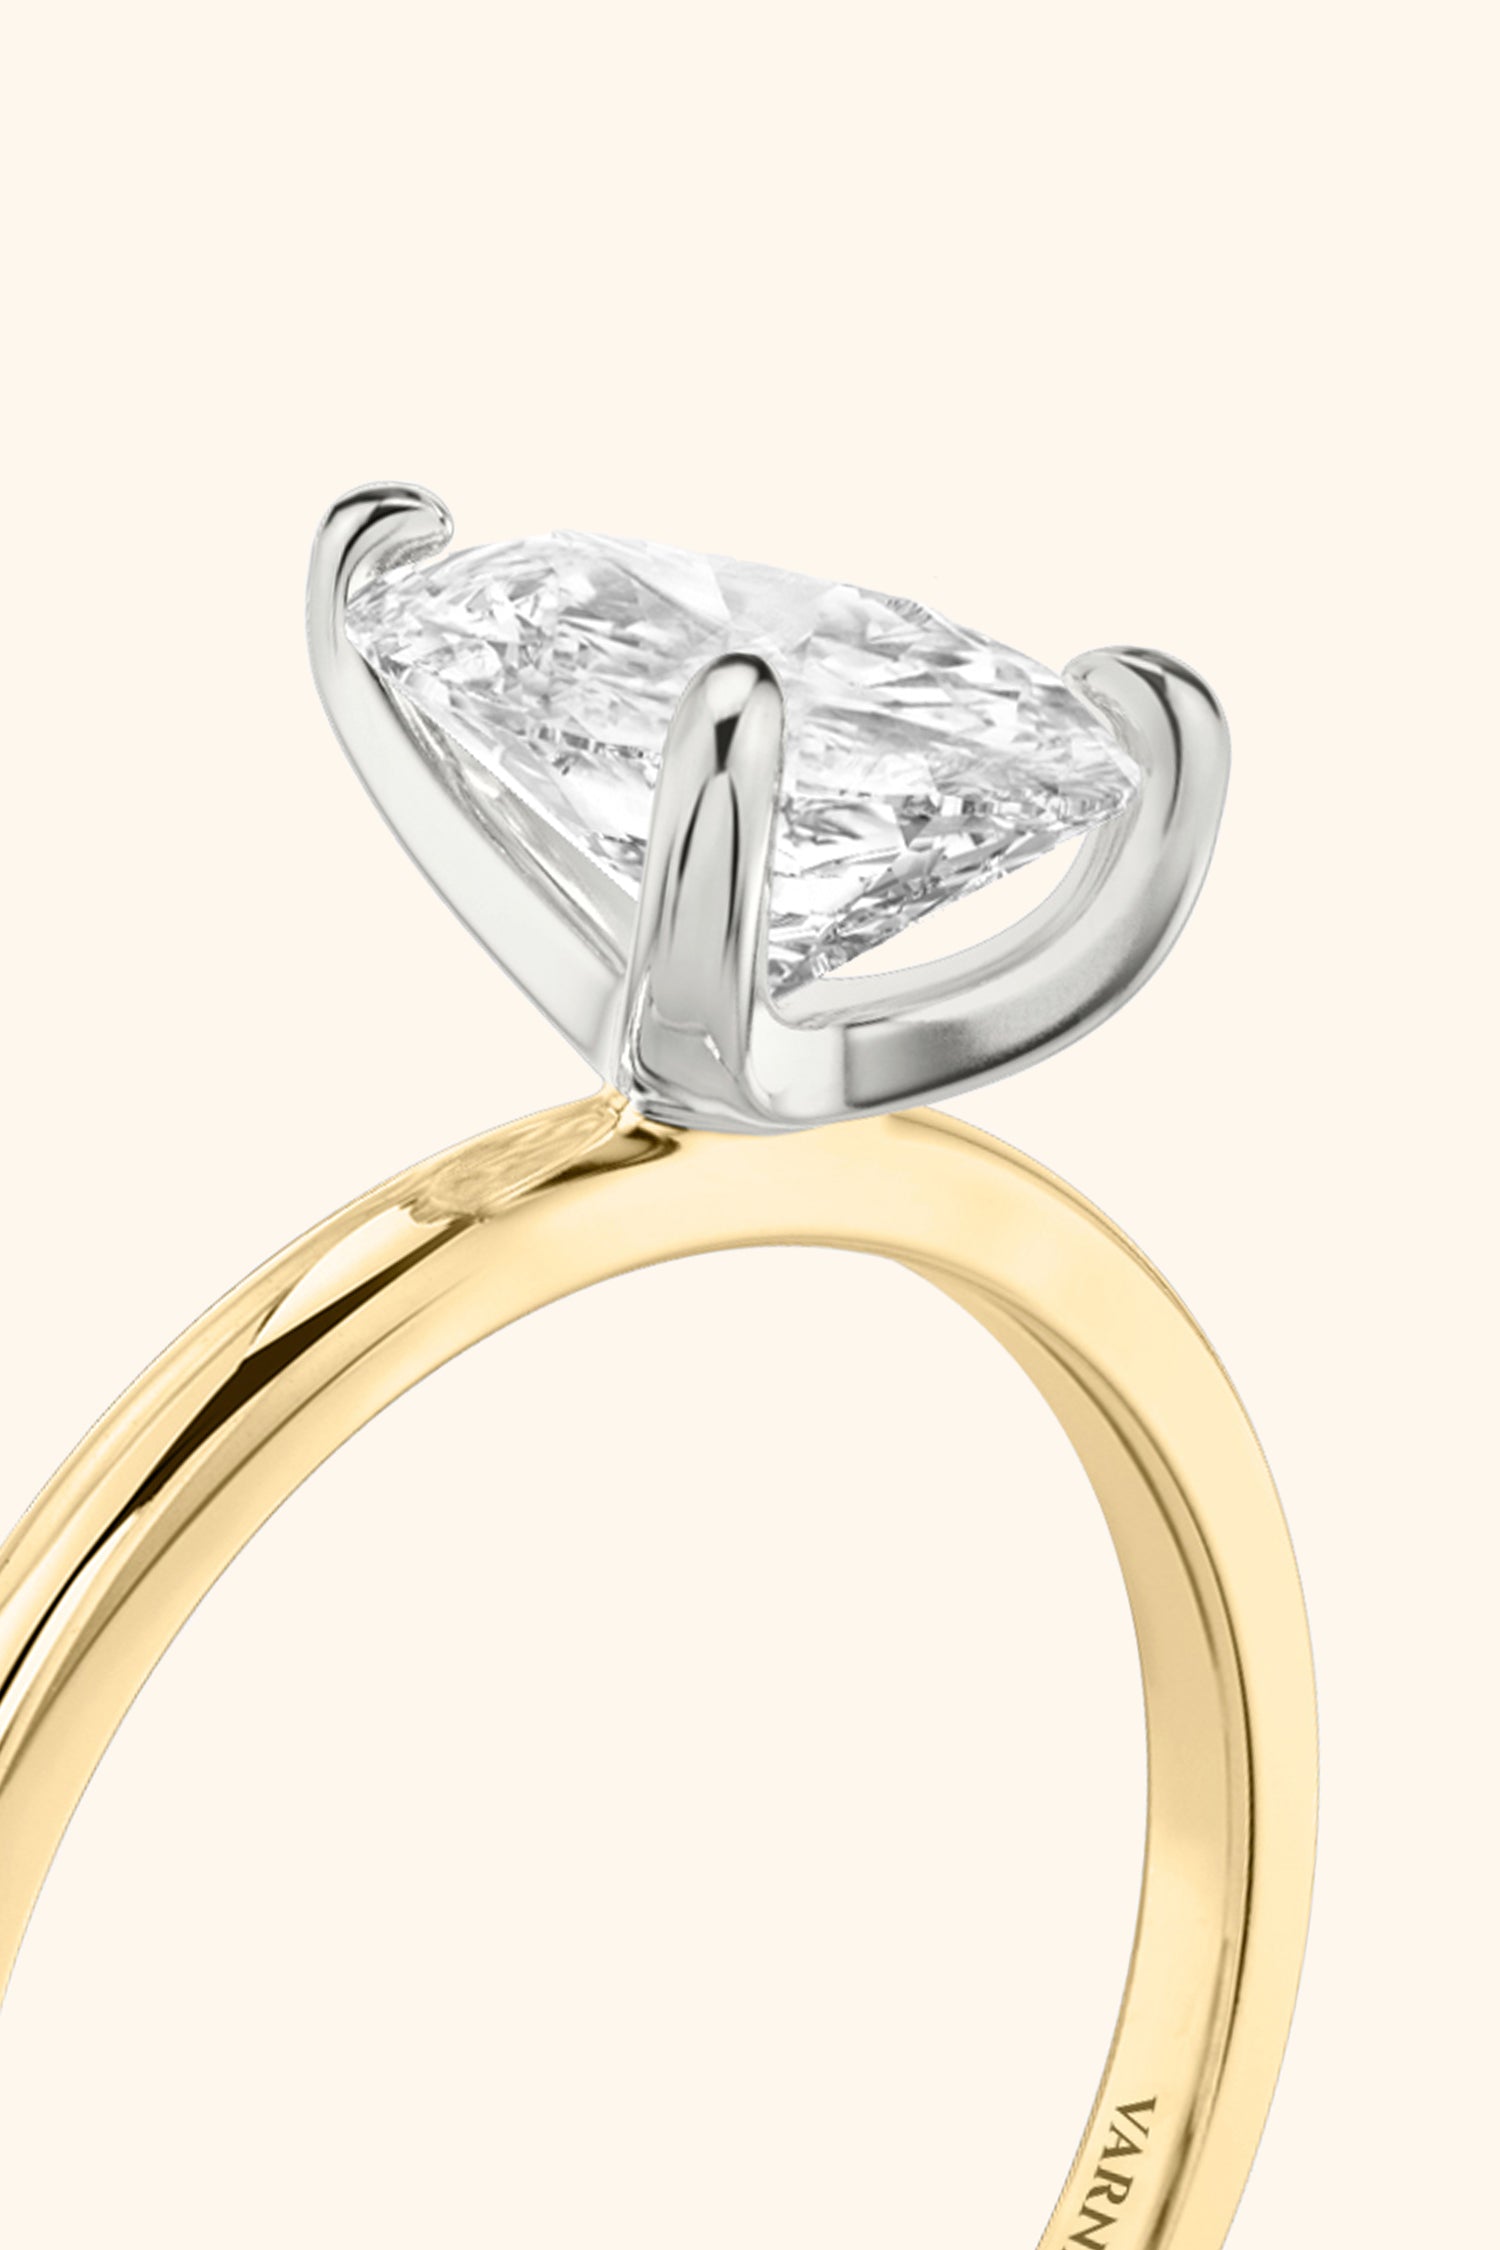 Dual Tone Glance Ring with Pear Solitaire.